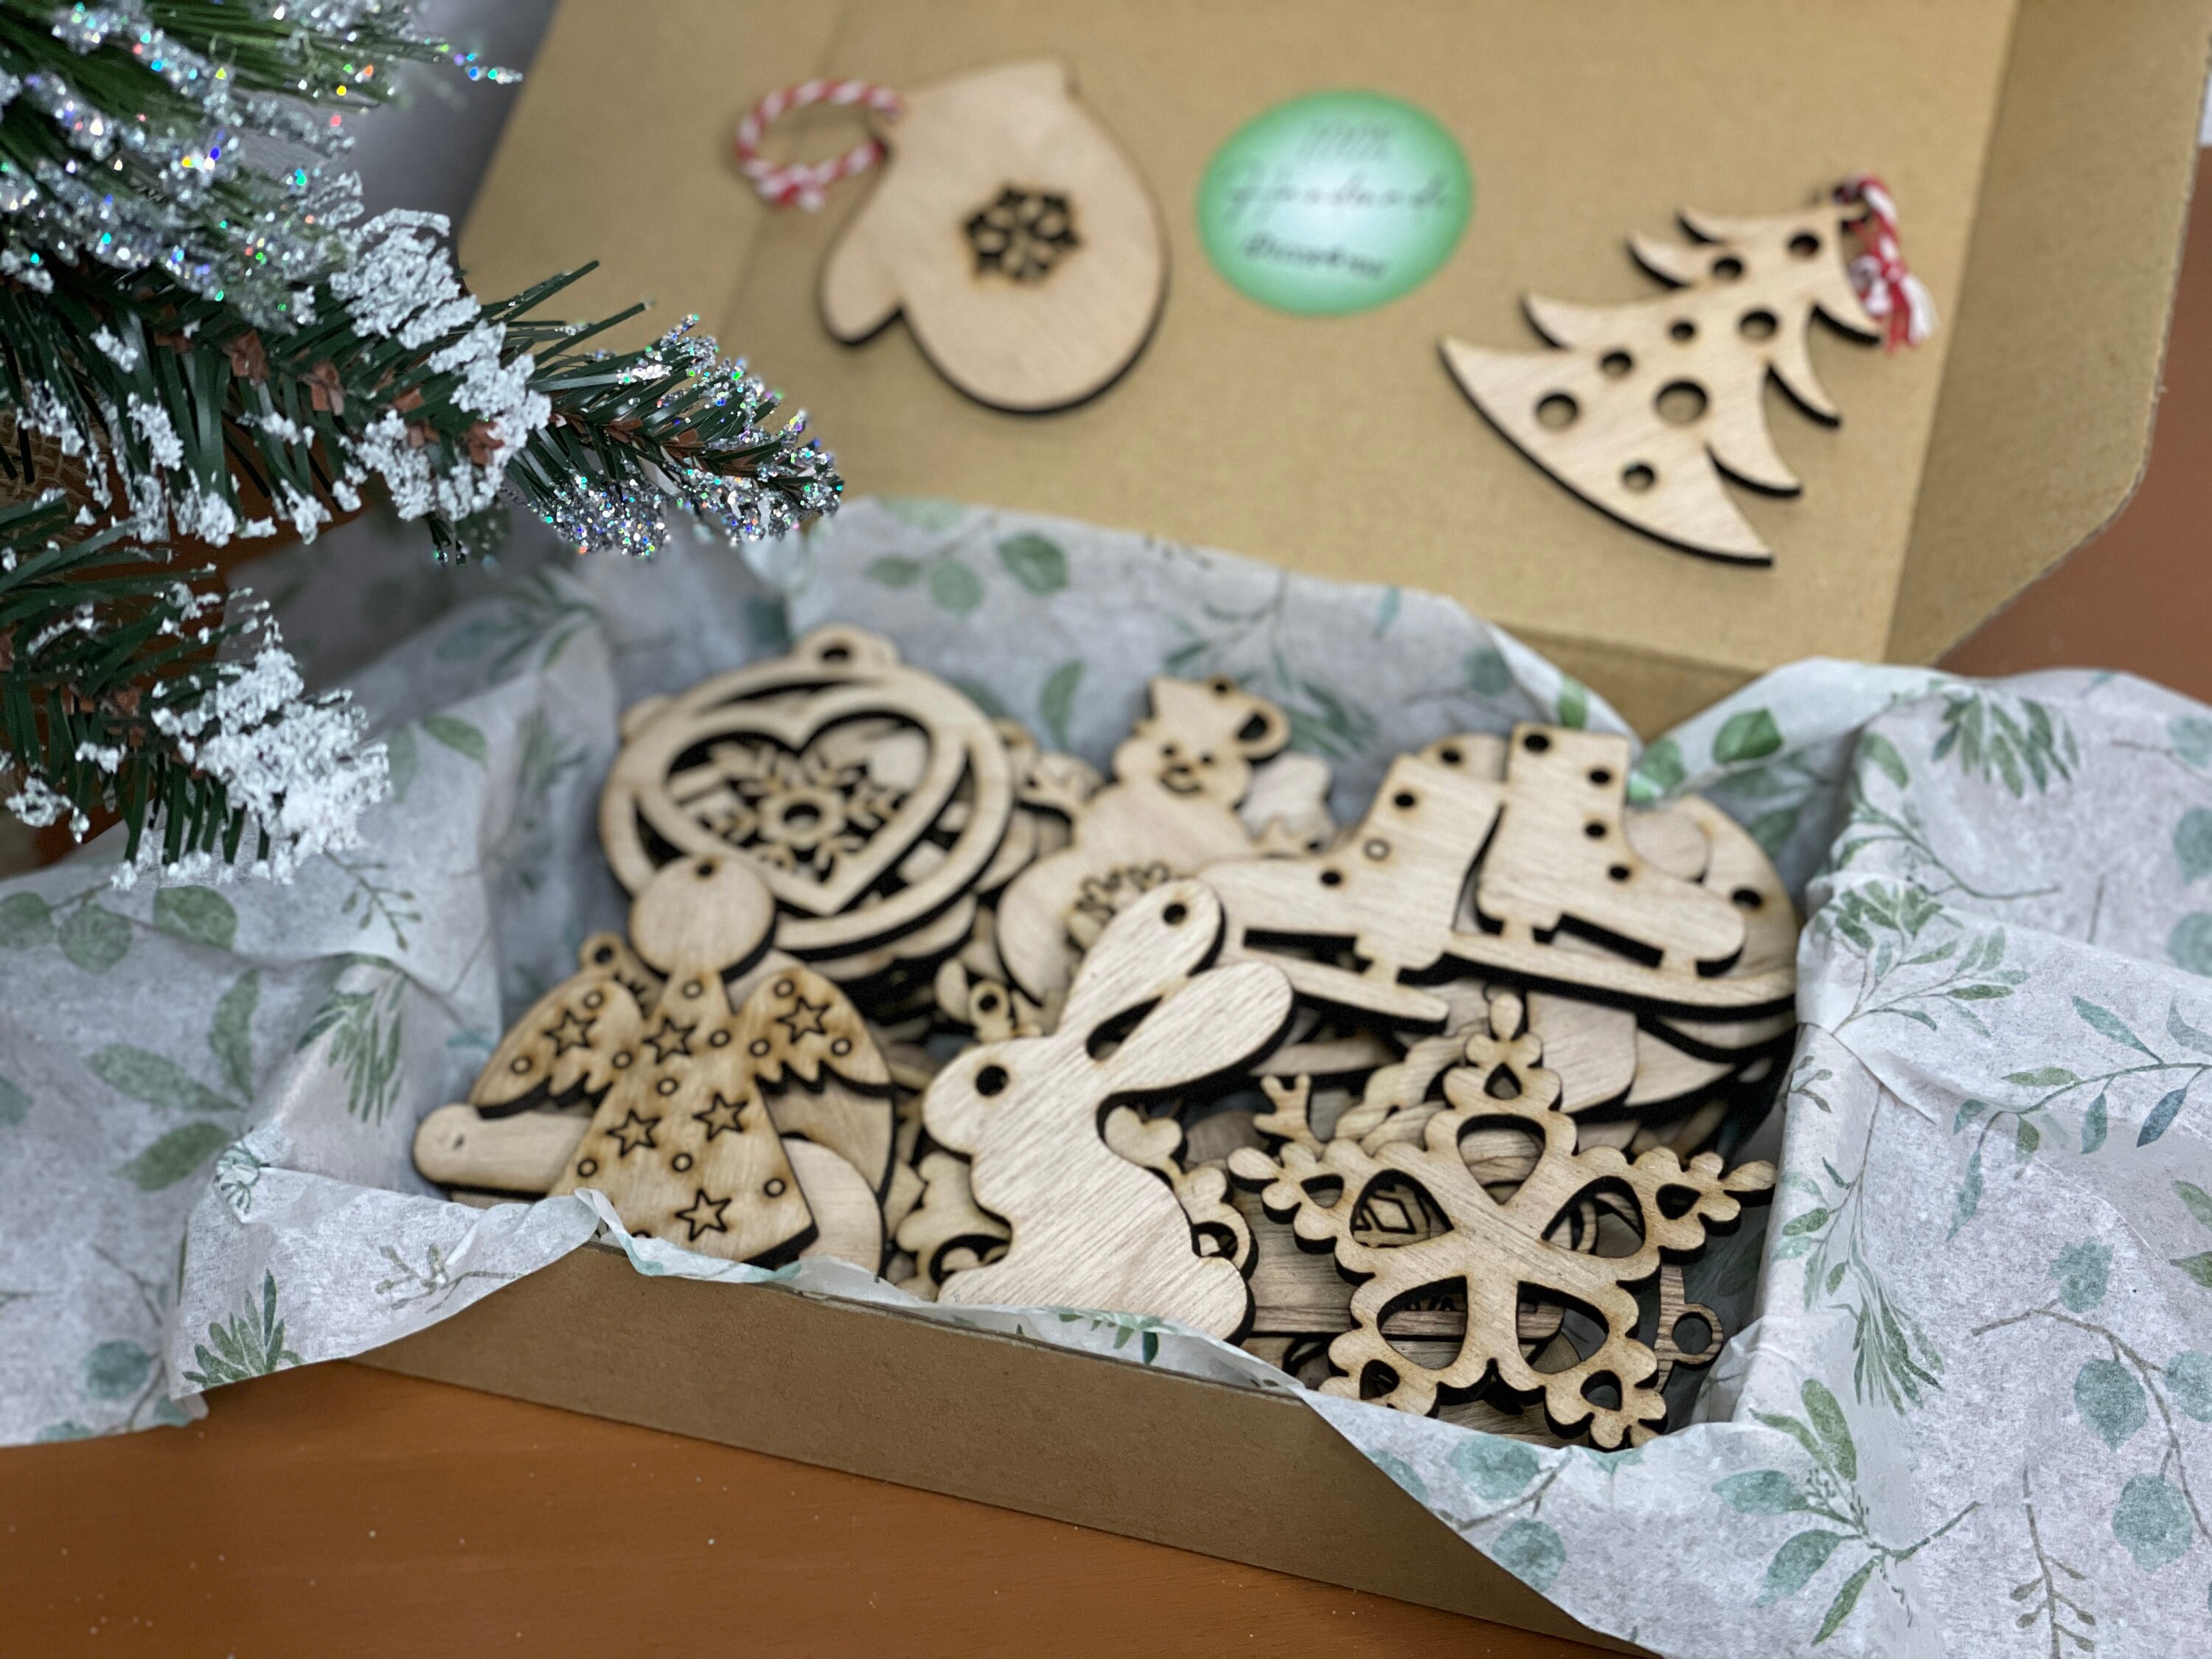 Christmas gift ornament set of 20. Large Wooden ornaments for Christmas  tree. Last minute gift idea. 3 inches diametr